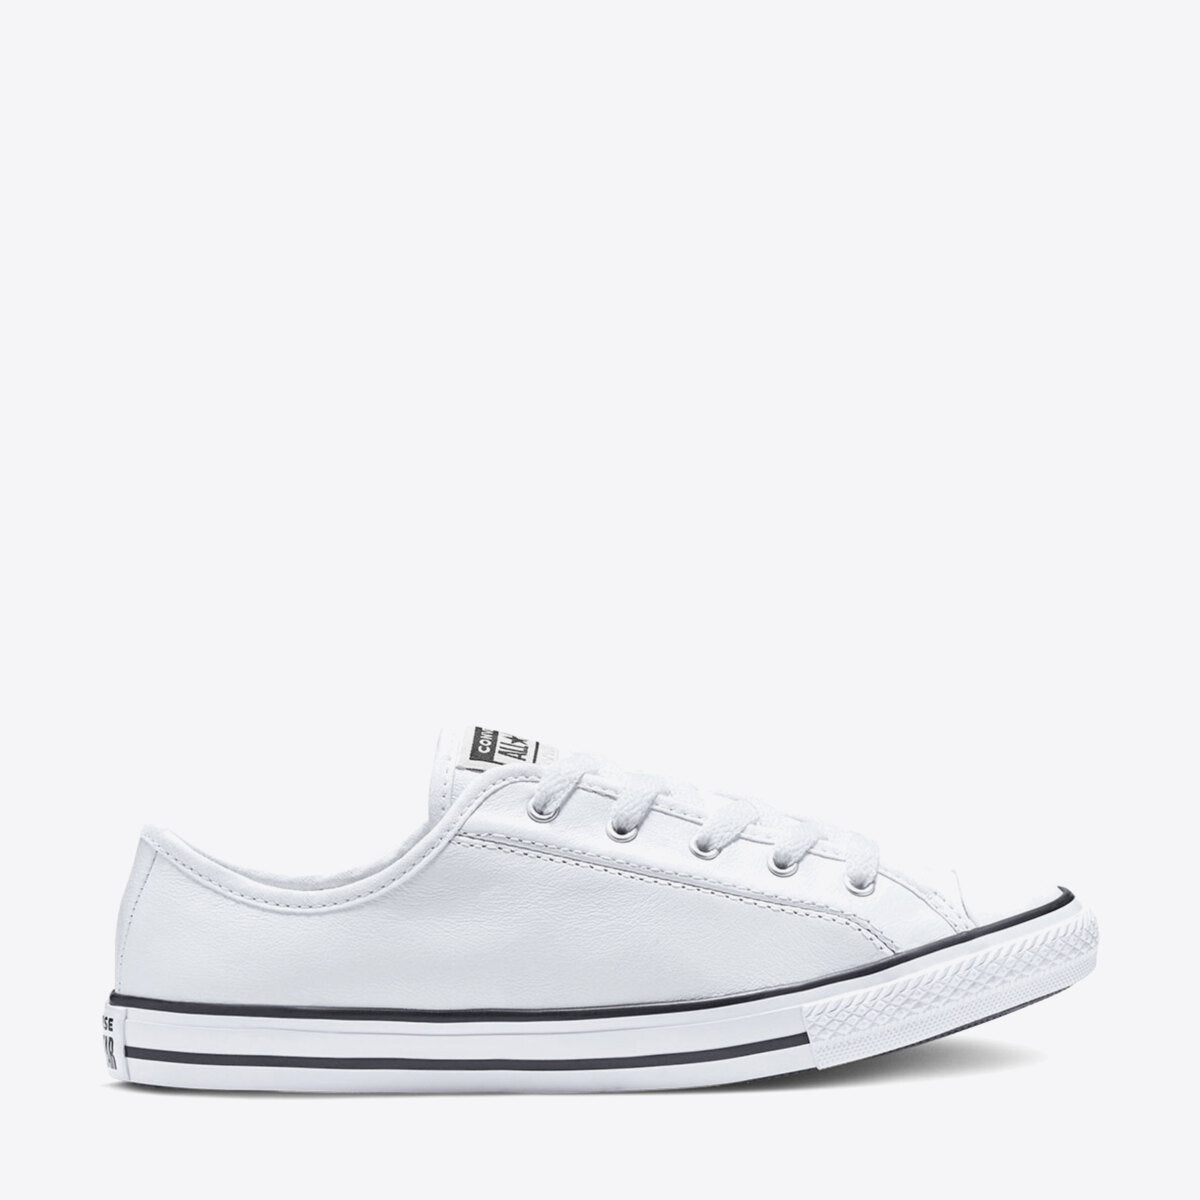 CONVERSE Dainty 2.0 Leather Low White - Image 2